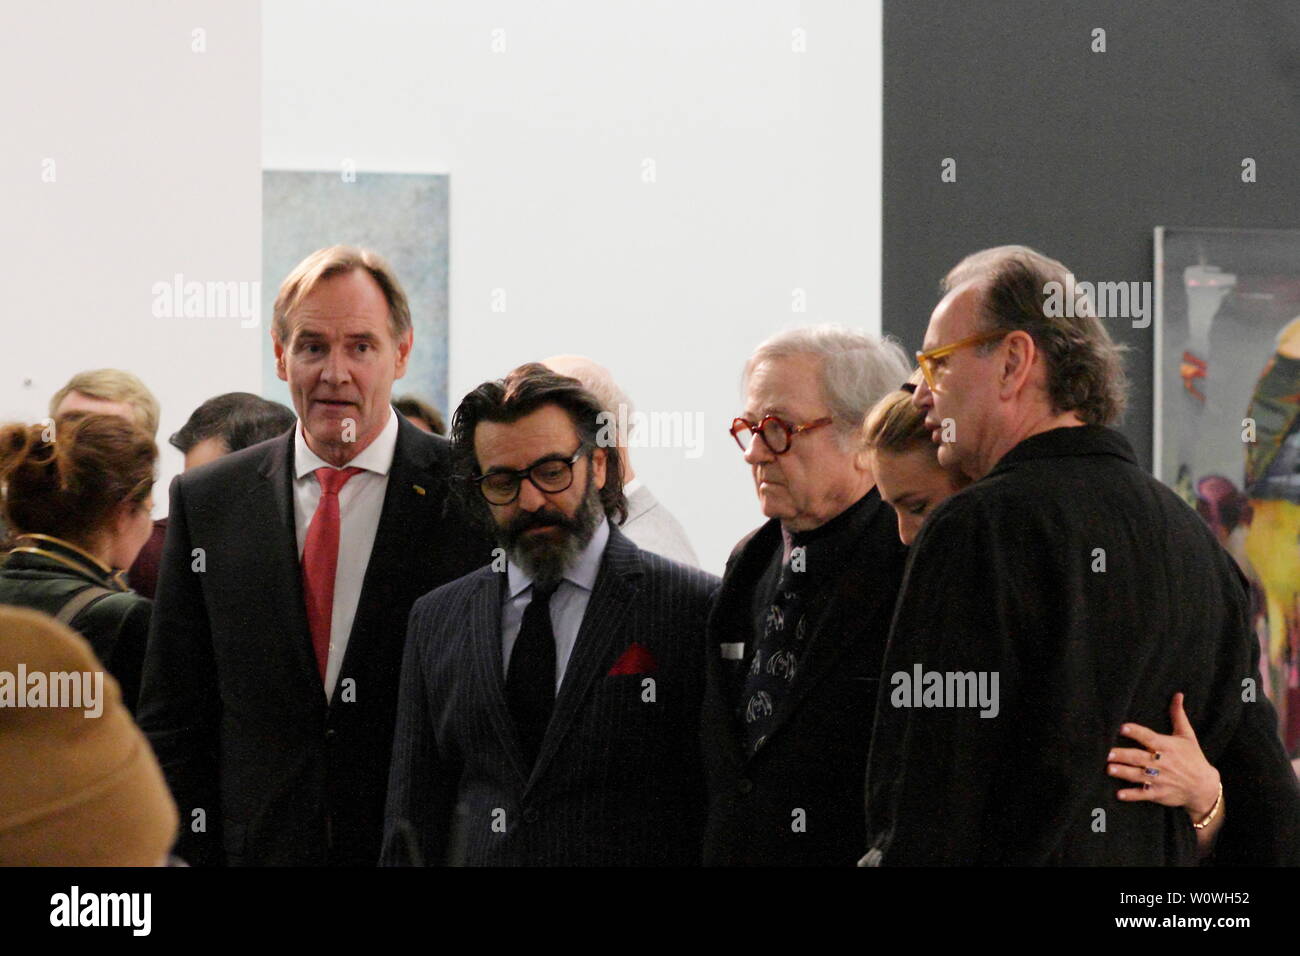 On April 3, 2019, the opening of the most extensive retrospective in Germany to date was held by the 86-year-old Japanese-American artist Yoko Ono at the MdbK Leipzig. Burkhard Jung, Lord Mayor of Leipzig, Alfred Weidinger, Director of the MdbK, Jon Hendricks, Curator and Jens Faurschou of the Faurschou Foundation spoke at the opening ceremony of 'PEACE is POWER'. Subsequently, Yoko Ono's SKY PIECE TO JESUS ??was performed by members of the Orchestra of the Musical Comedy. Stock Photo